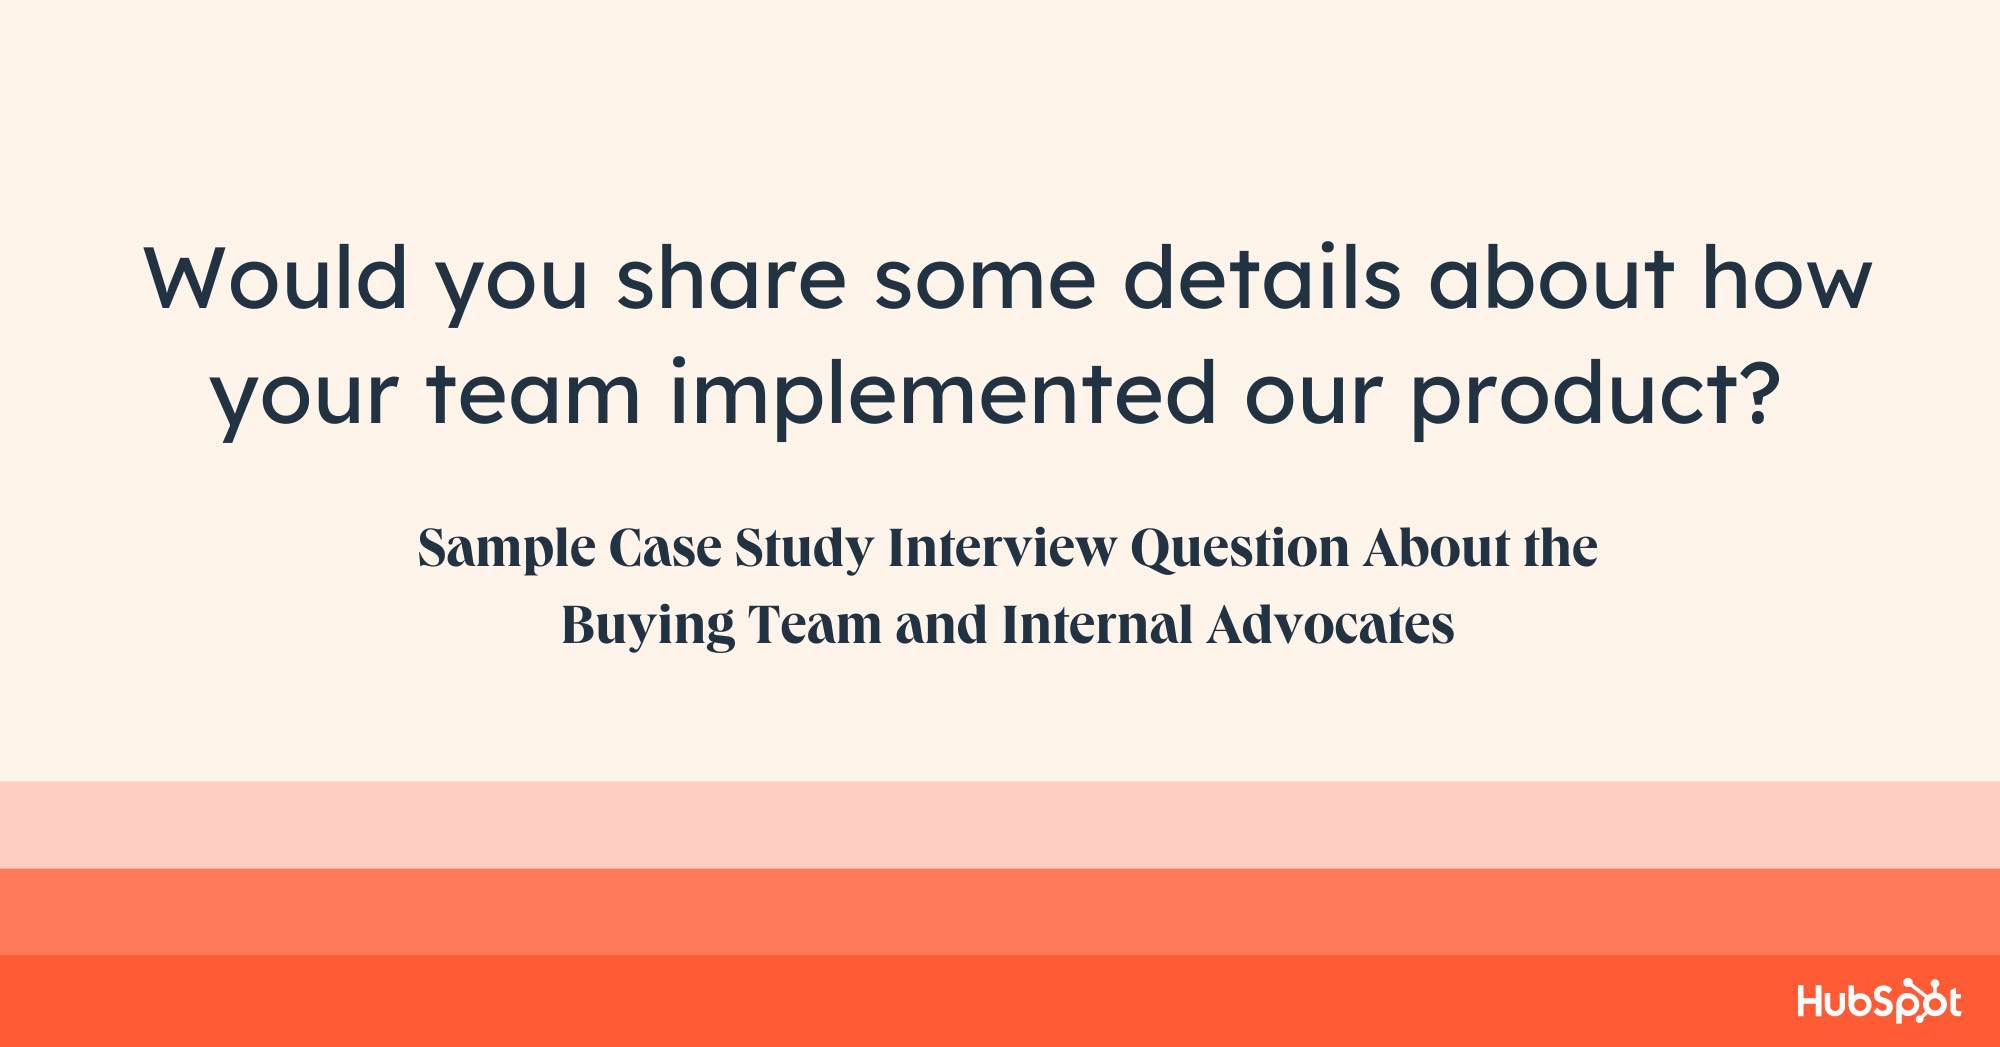 case study questions to ask, would you share some details about how your team implemented our product?